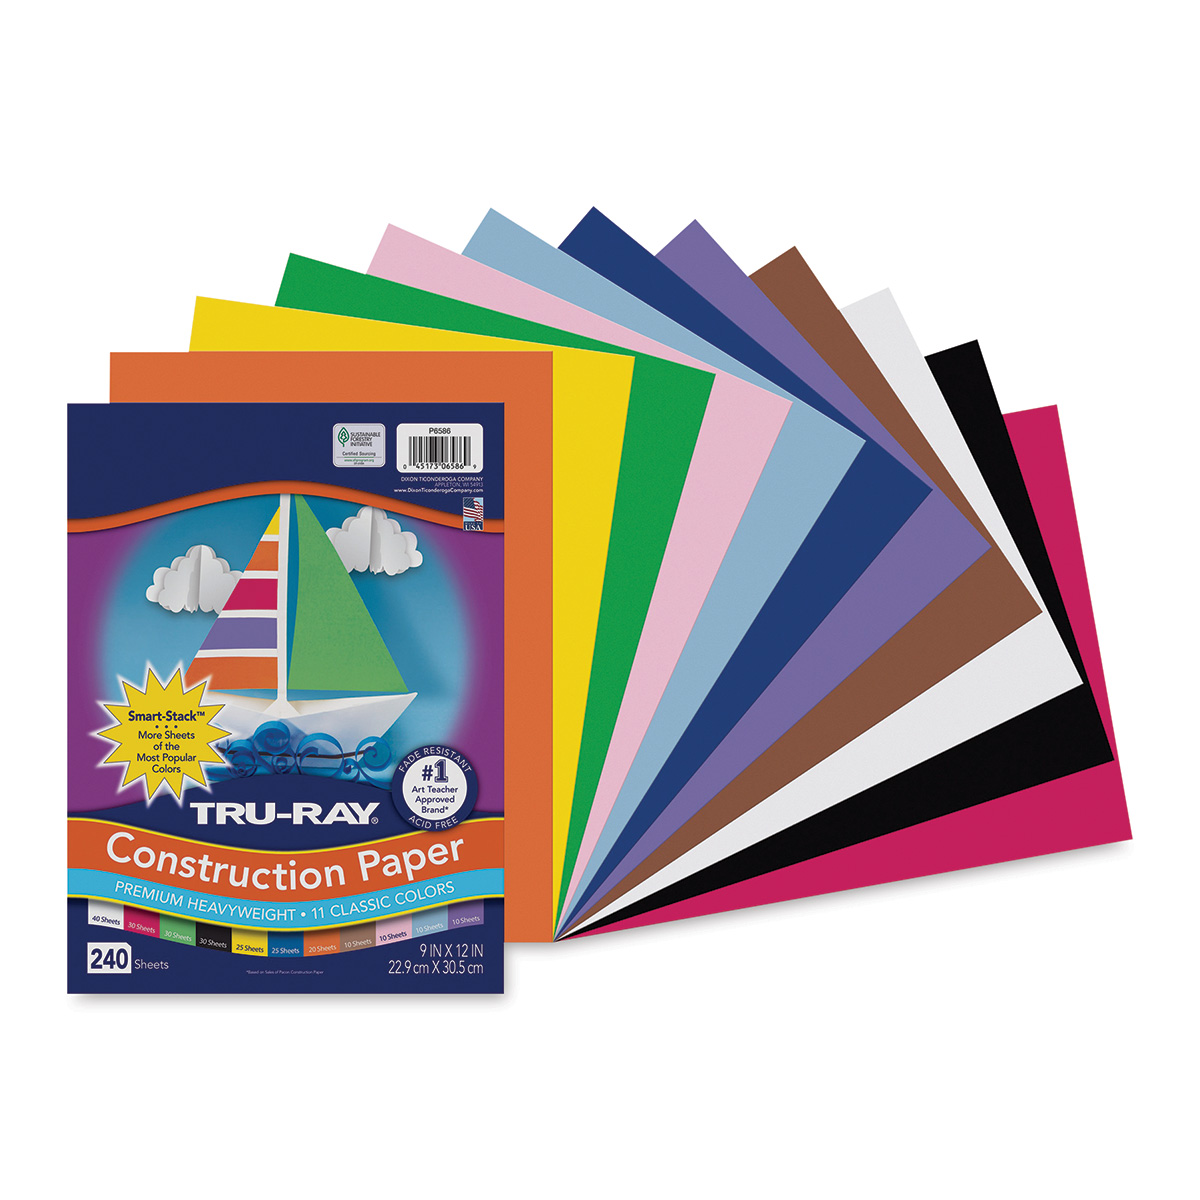 Tru-Ray 9 x 12 Construction Paper, Black/White, 144 Sheets/Pack